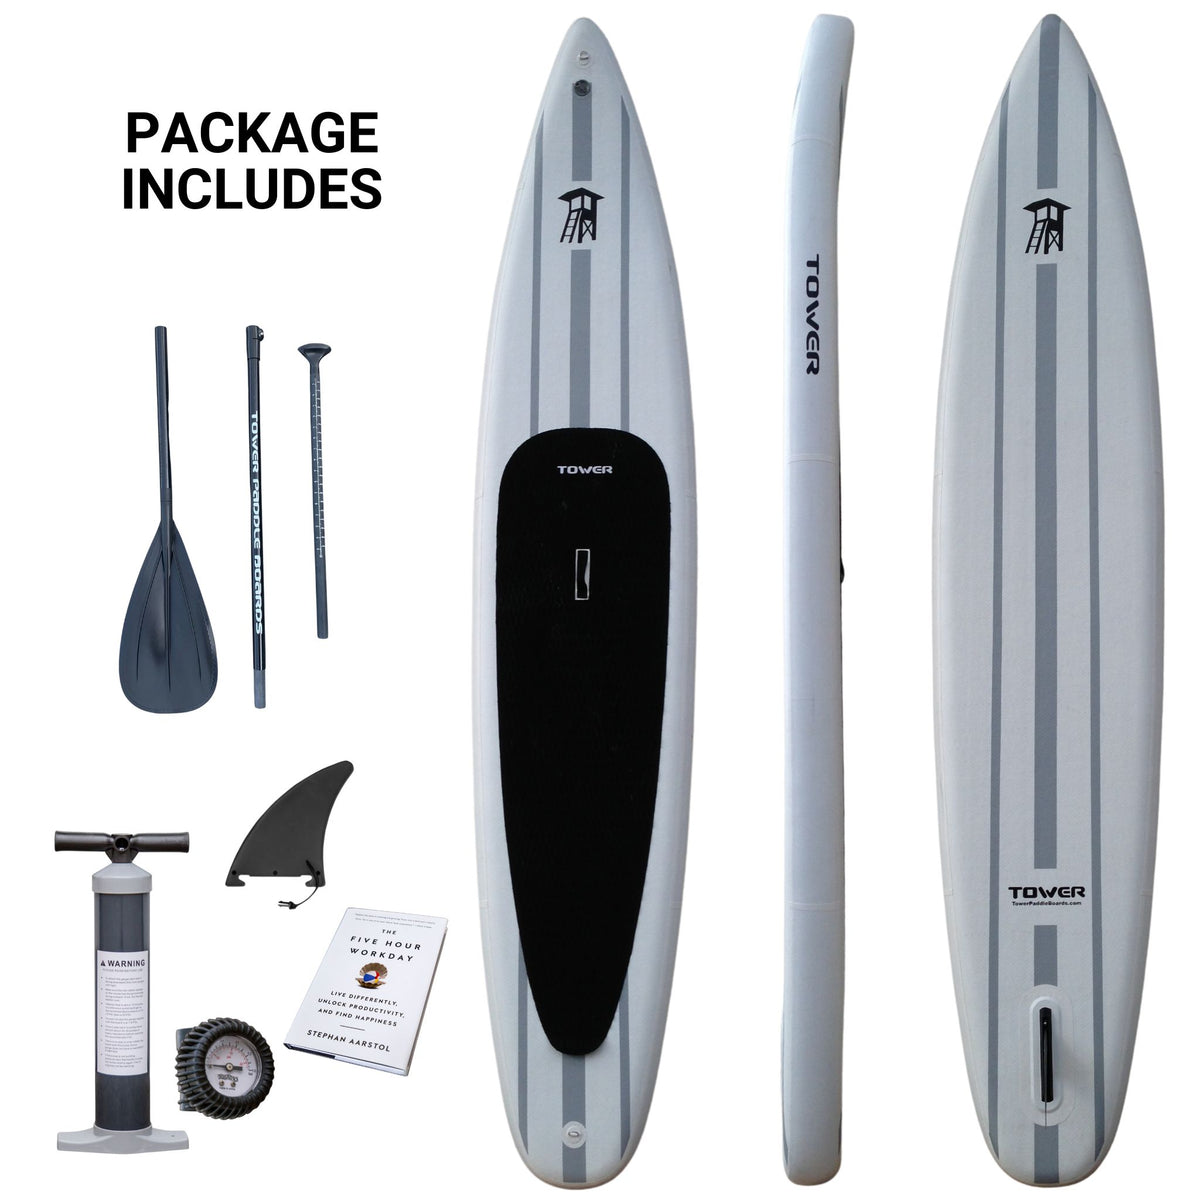 Paddle Boards Xplorer Tower Tower Board: Paddle – Touring